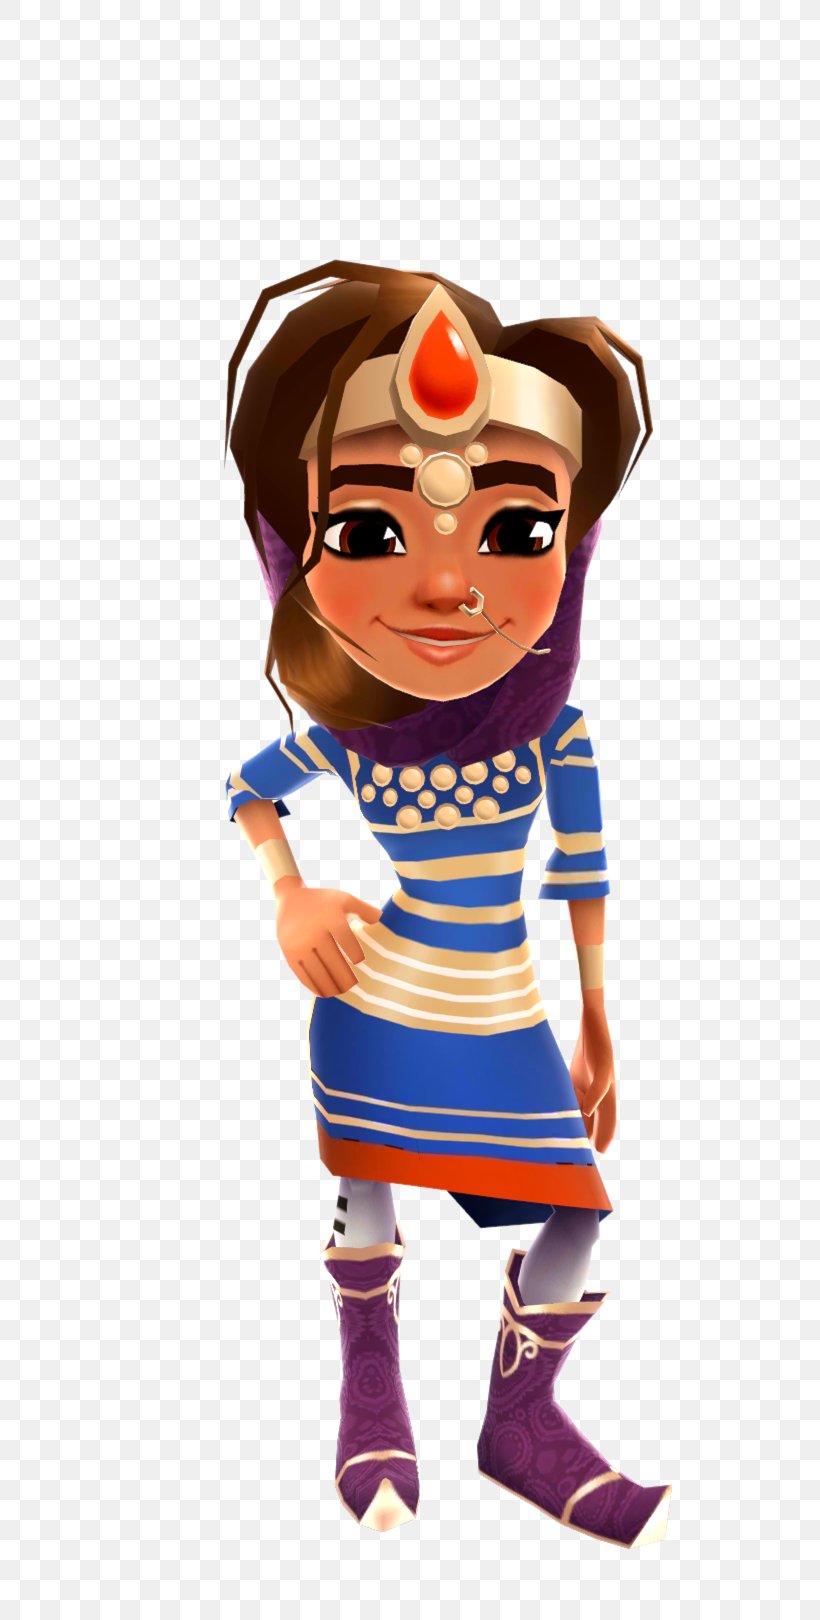 Subway Surfers Character Wiki Doll Figurine, PNG, 758x1620px, Subway Surfers, Cartoon, Character, Dance, Doll Download Free